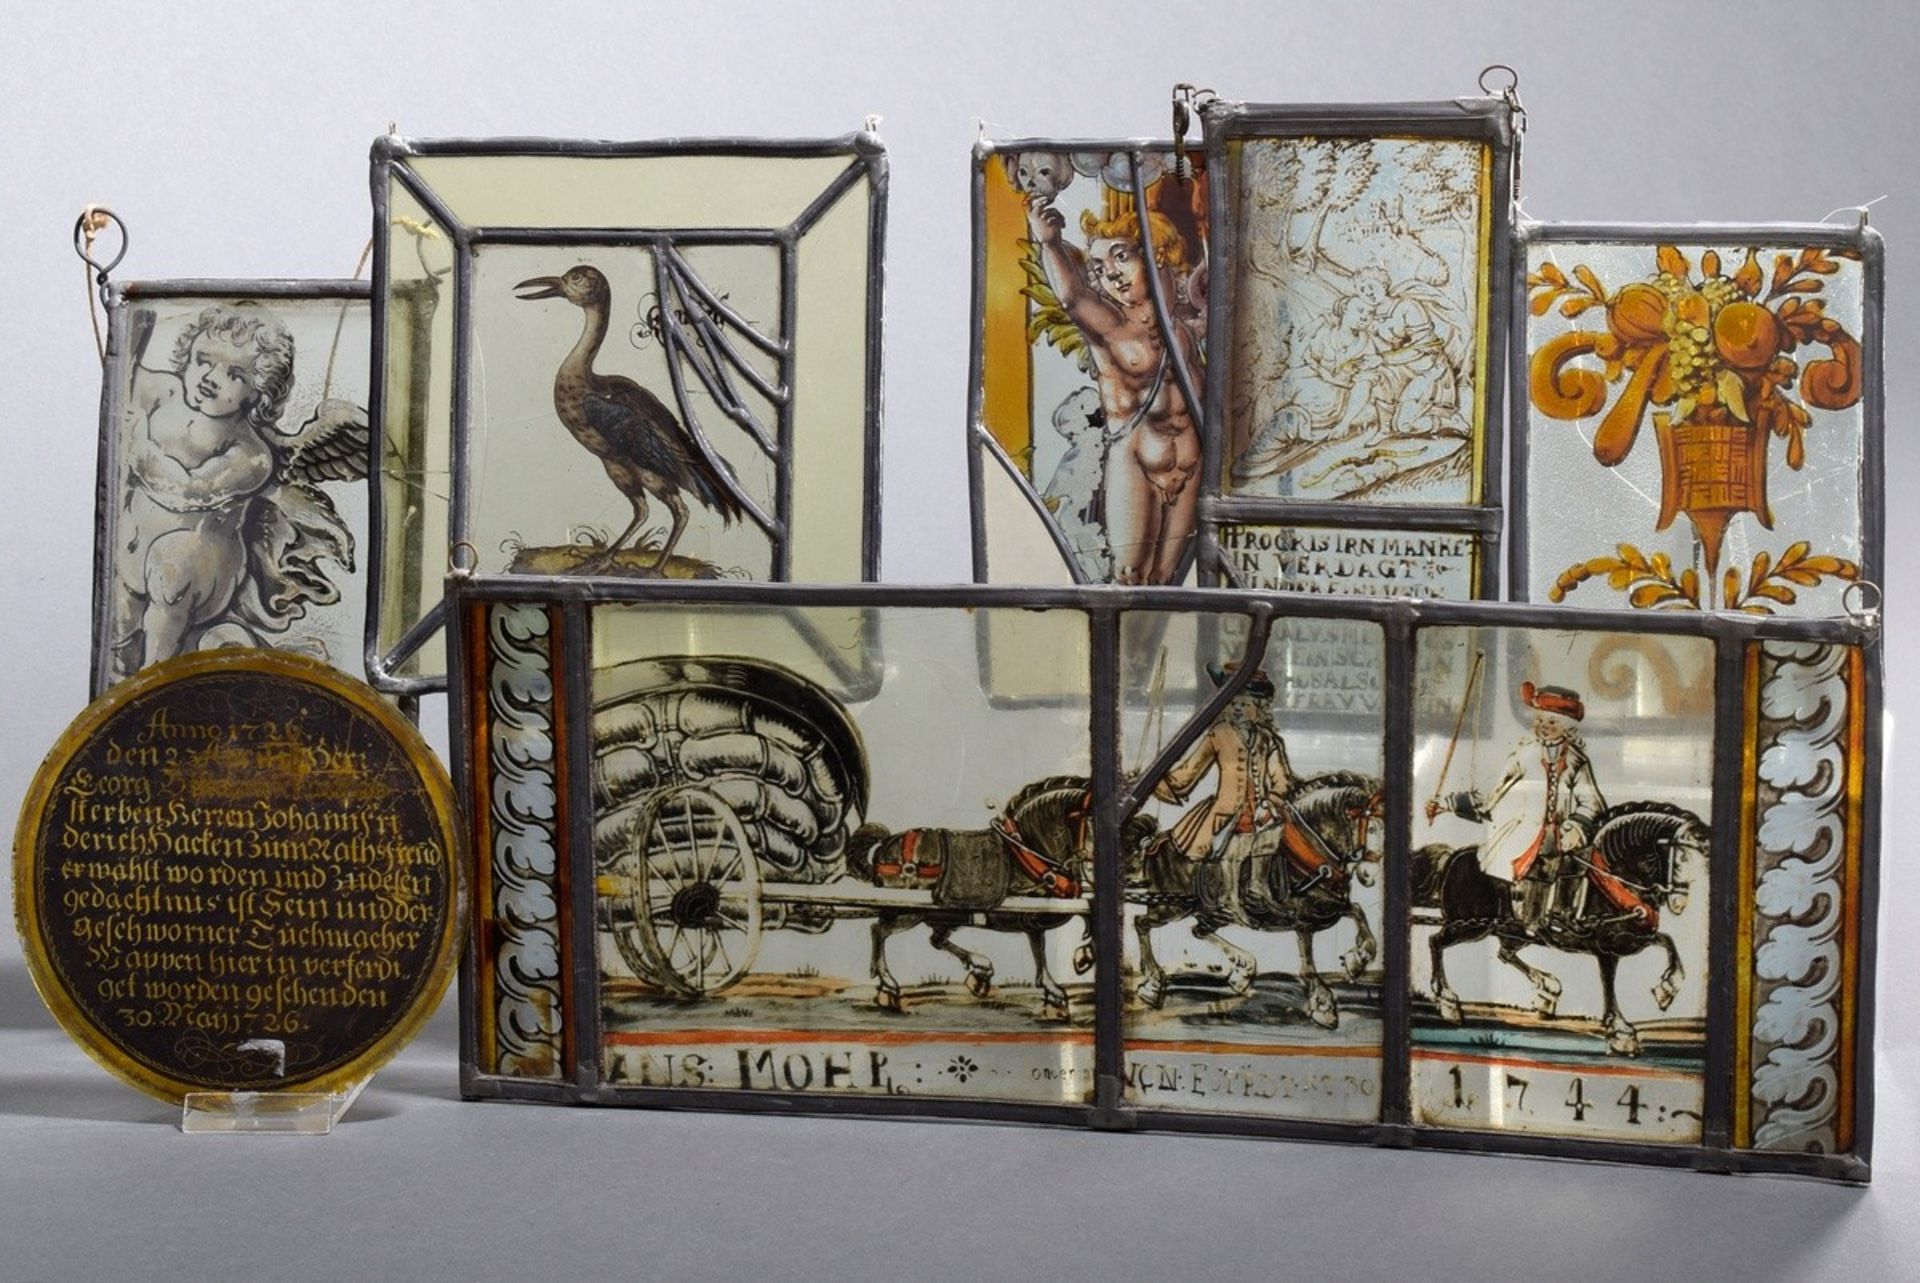 7 Various antique leaded glass with antique scenes, sayings, figural representations etc. in square